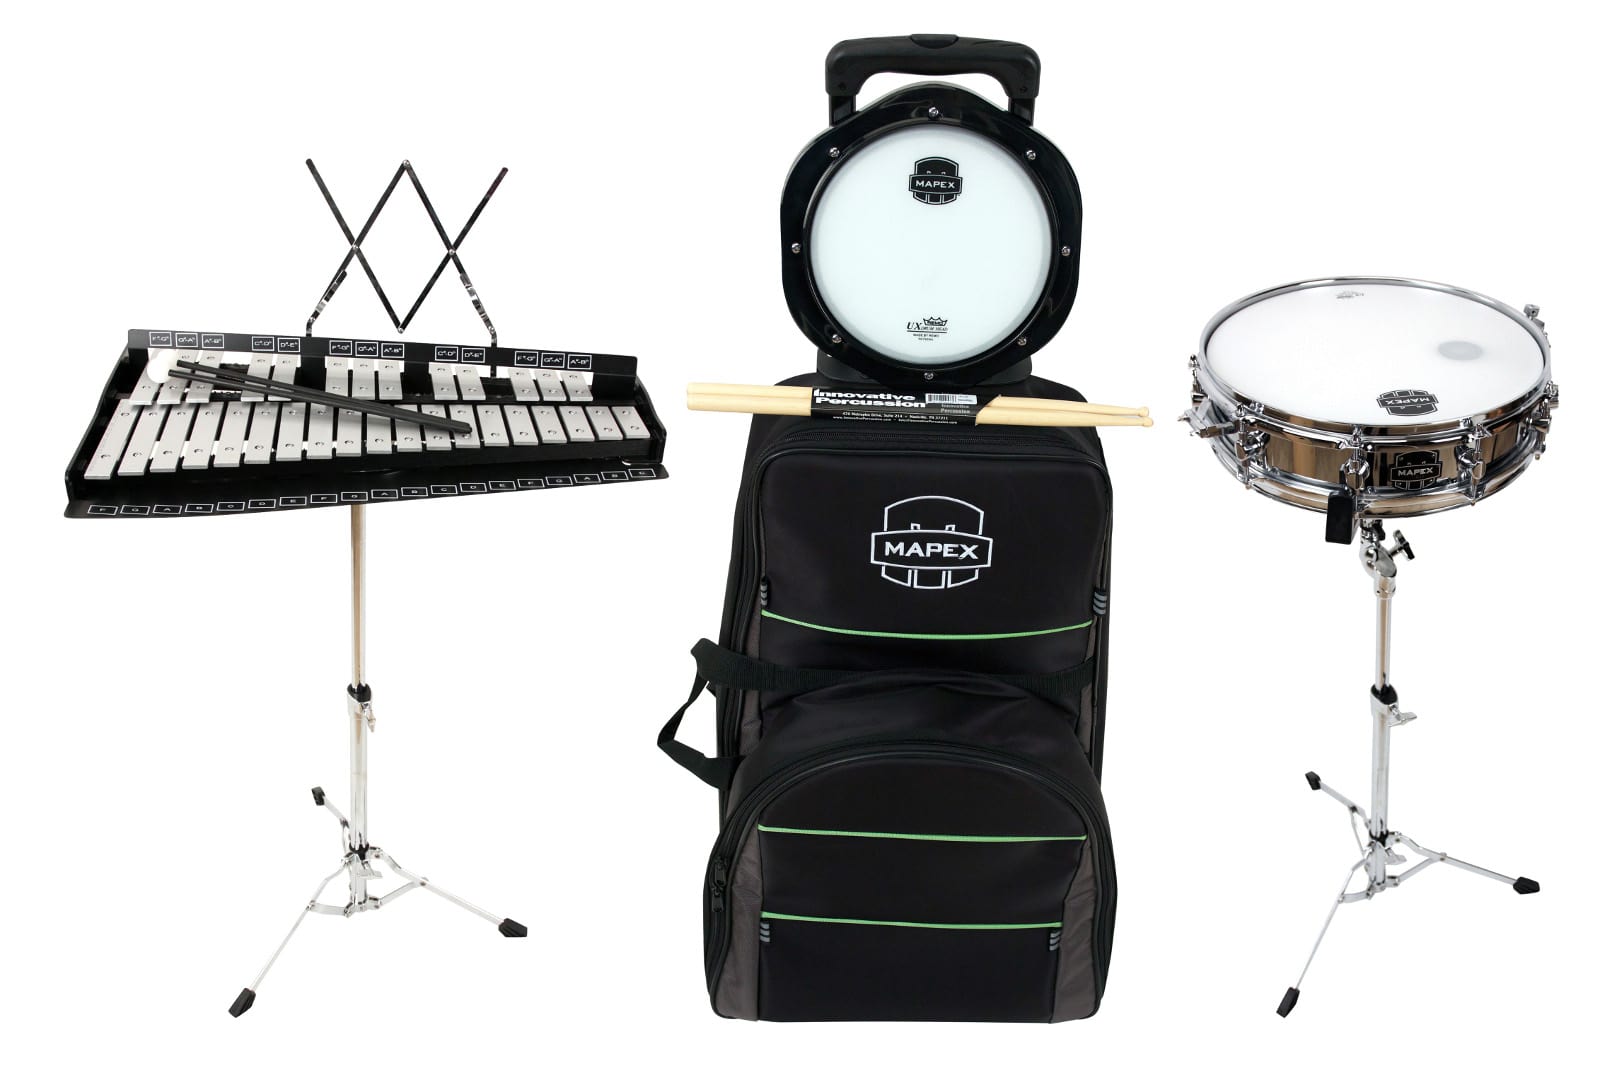 MAPEX MCK1432DP - CONCERT BELL AND SNARE DRUM STUDENT KIT - NEWS